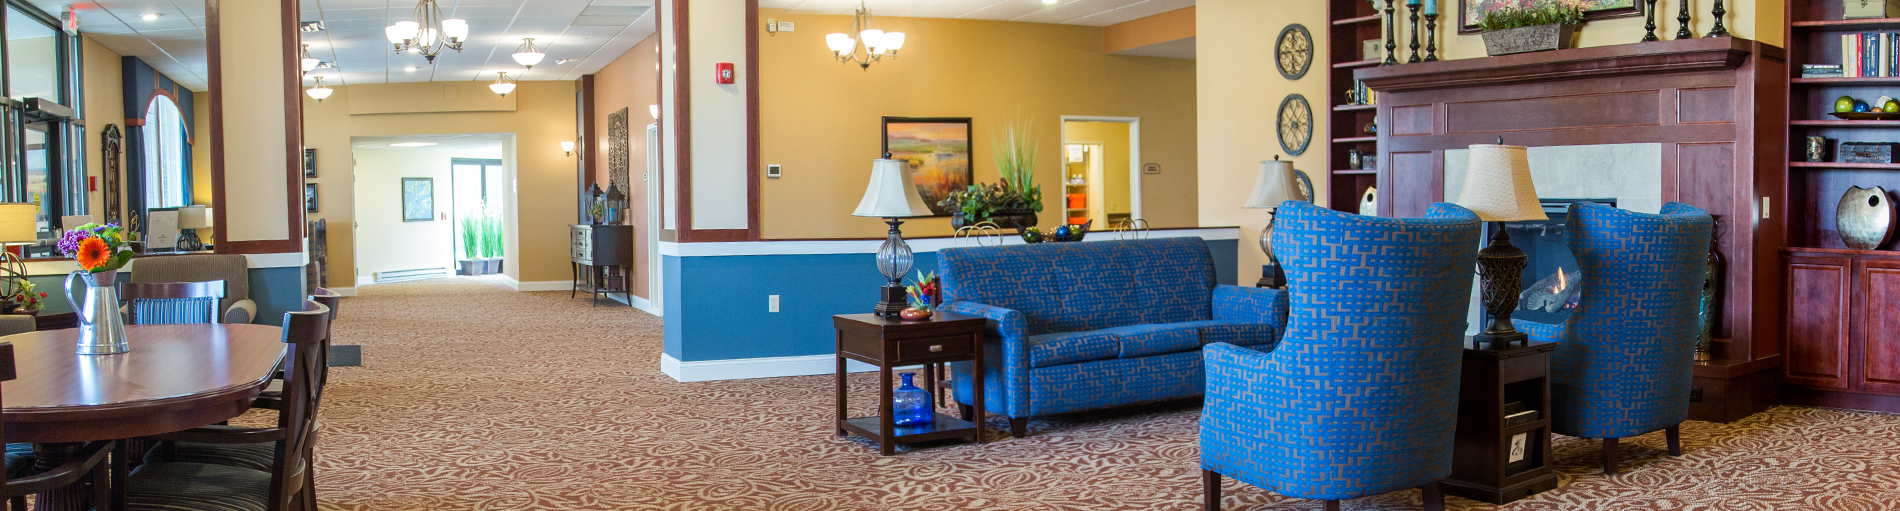 Schedule a Tour of a Senior Home in MN